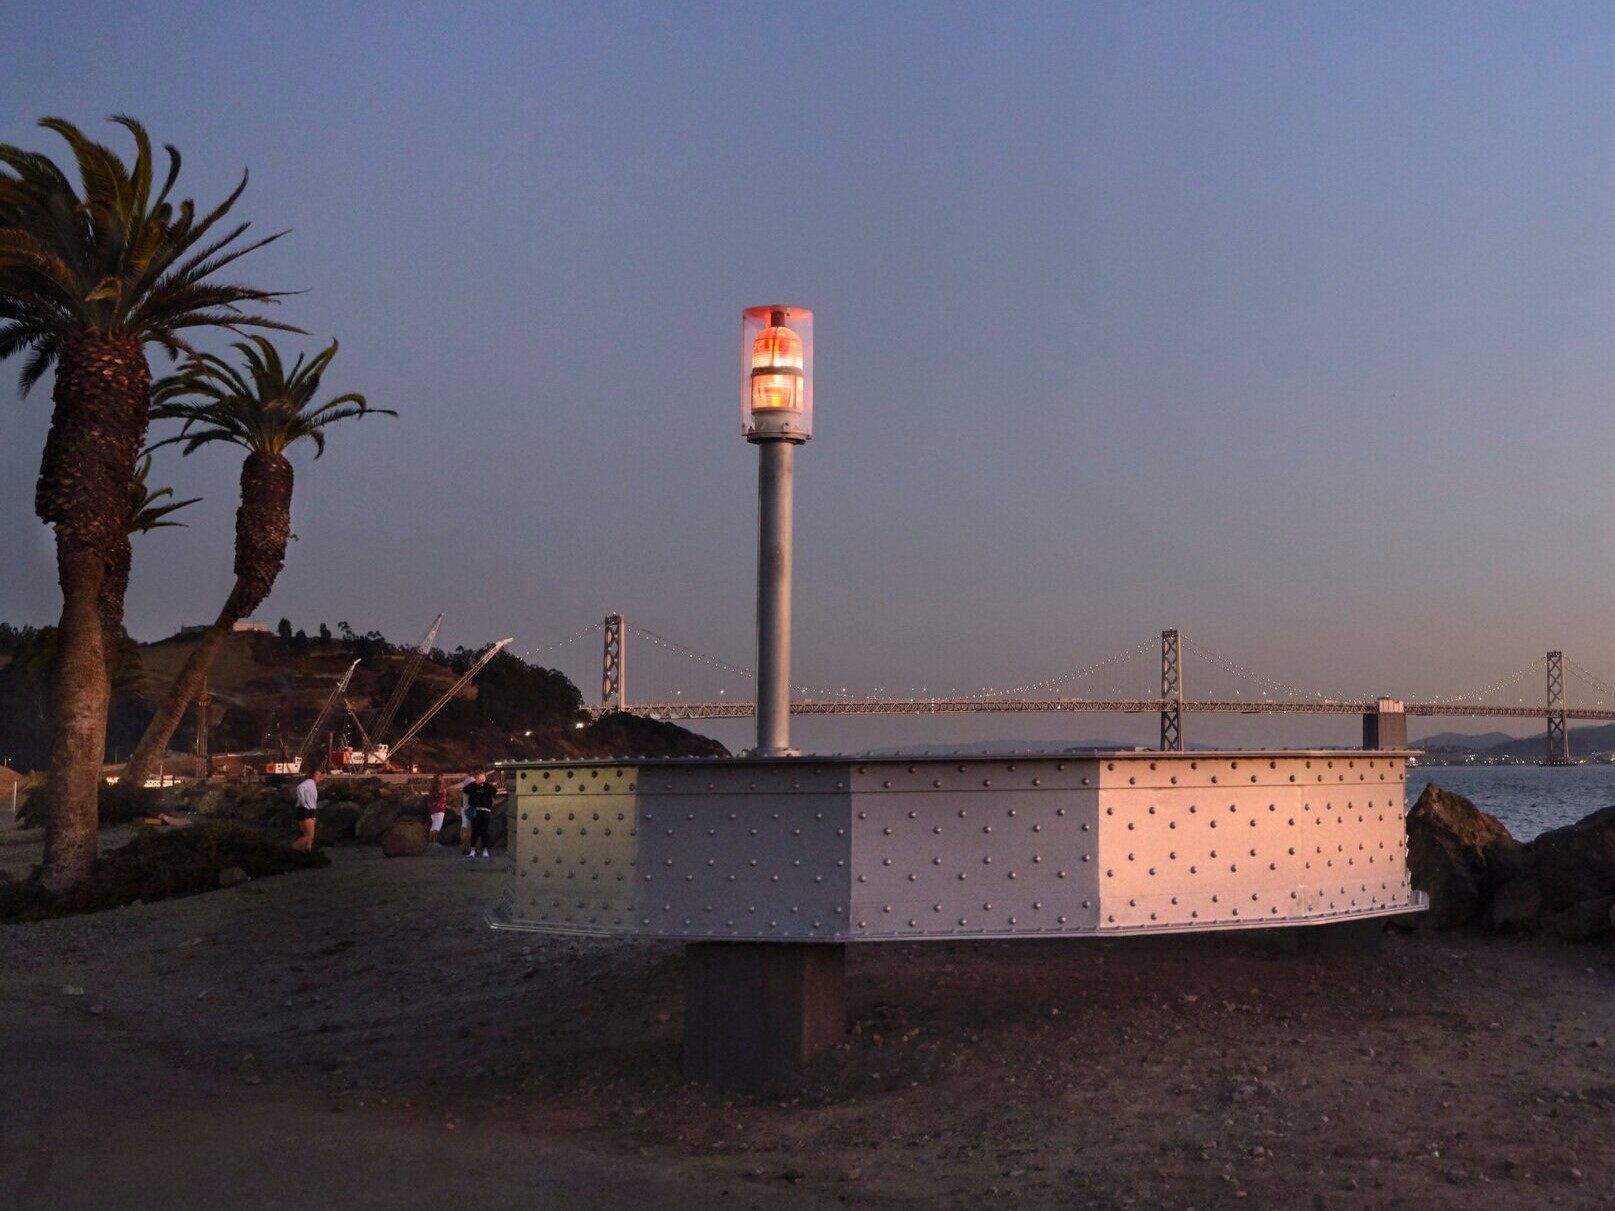 The artwork Signal is pictured along the Treasure Island shoreline, palm trees are behind the artwork